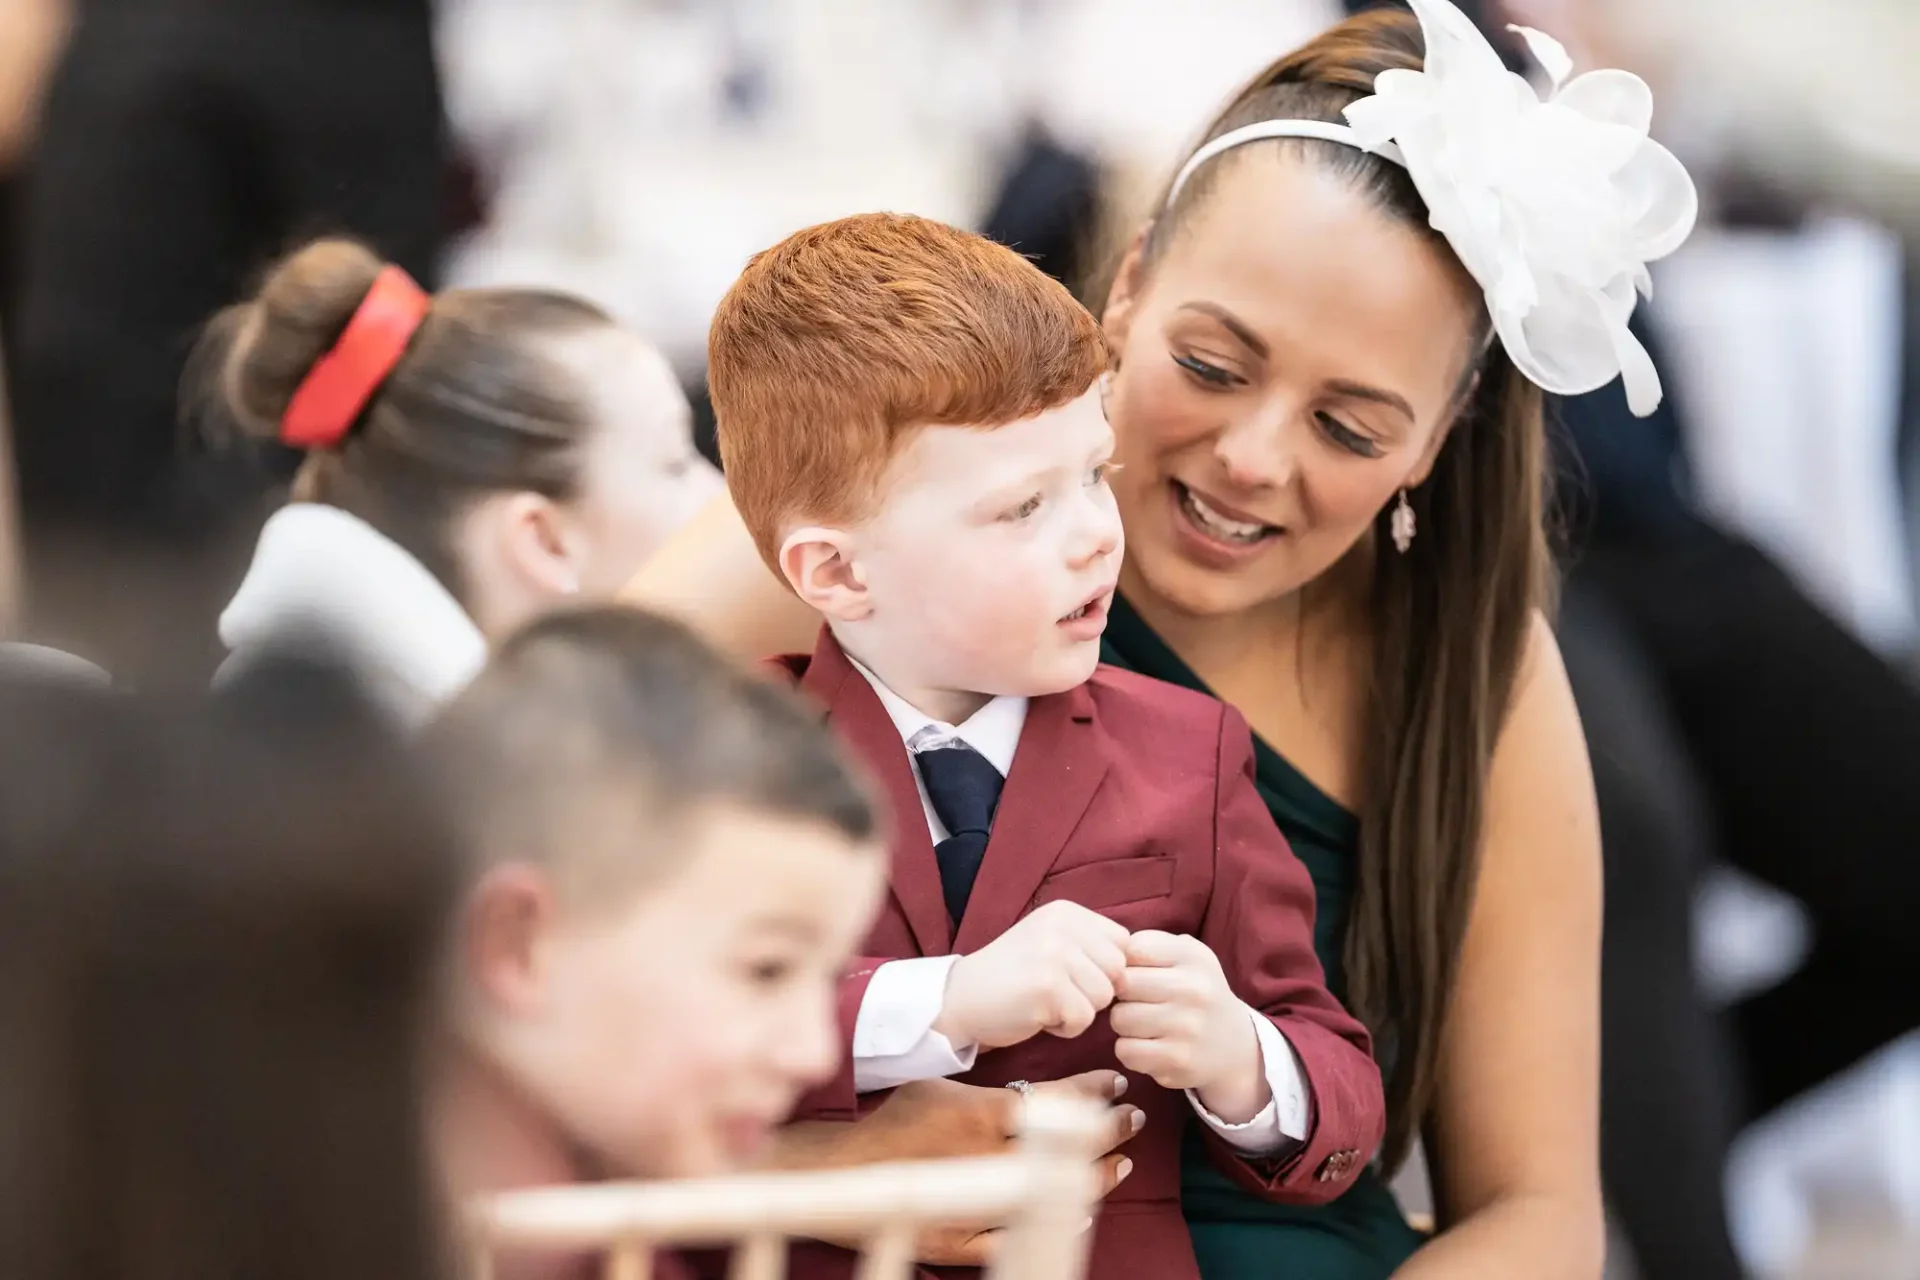 A young boy with red hair, dressed in a burgundy suit, converses with a smiling woman wearing a white fascinator at a formal event.